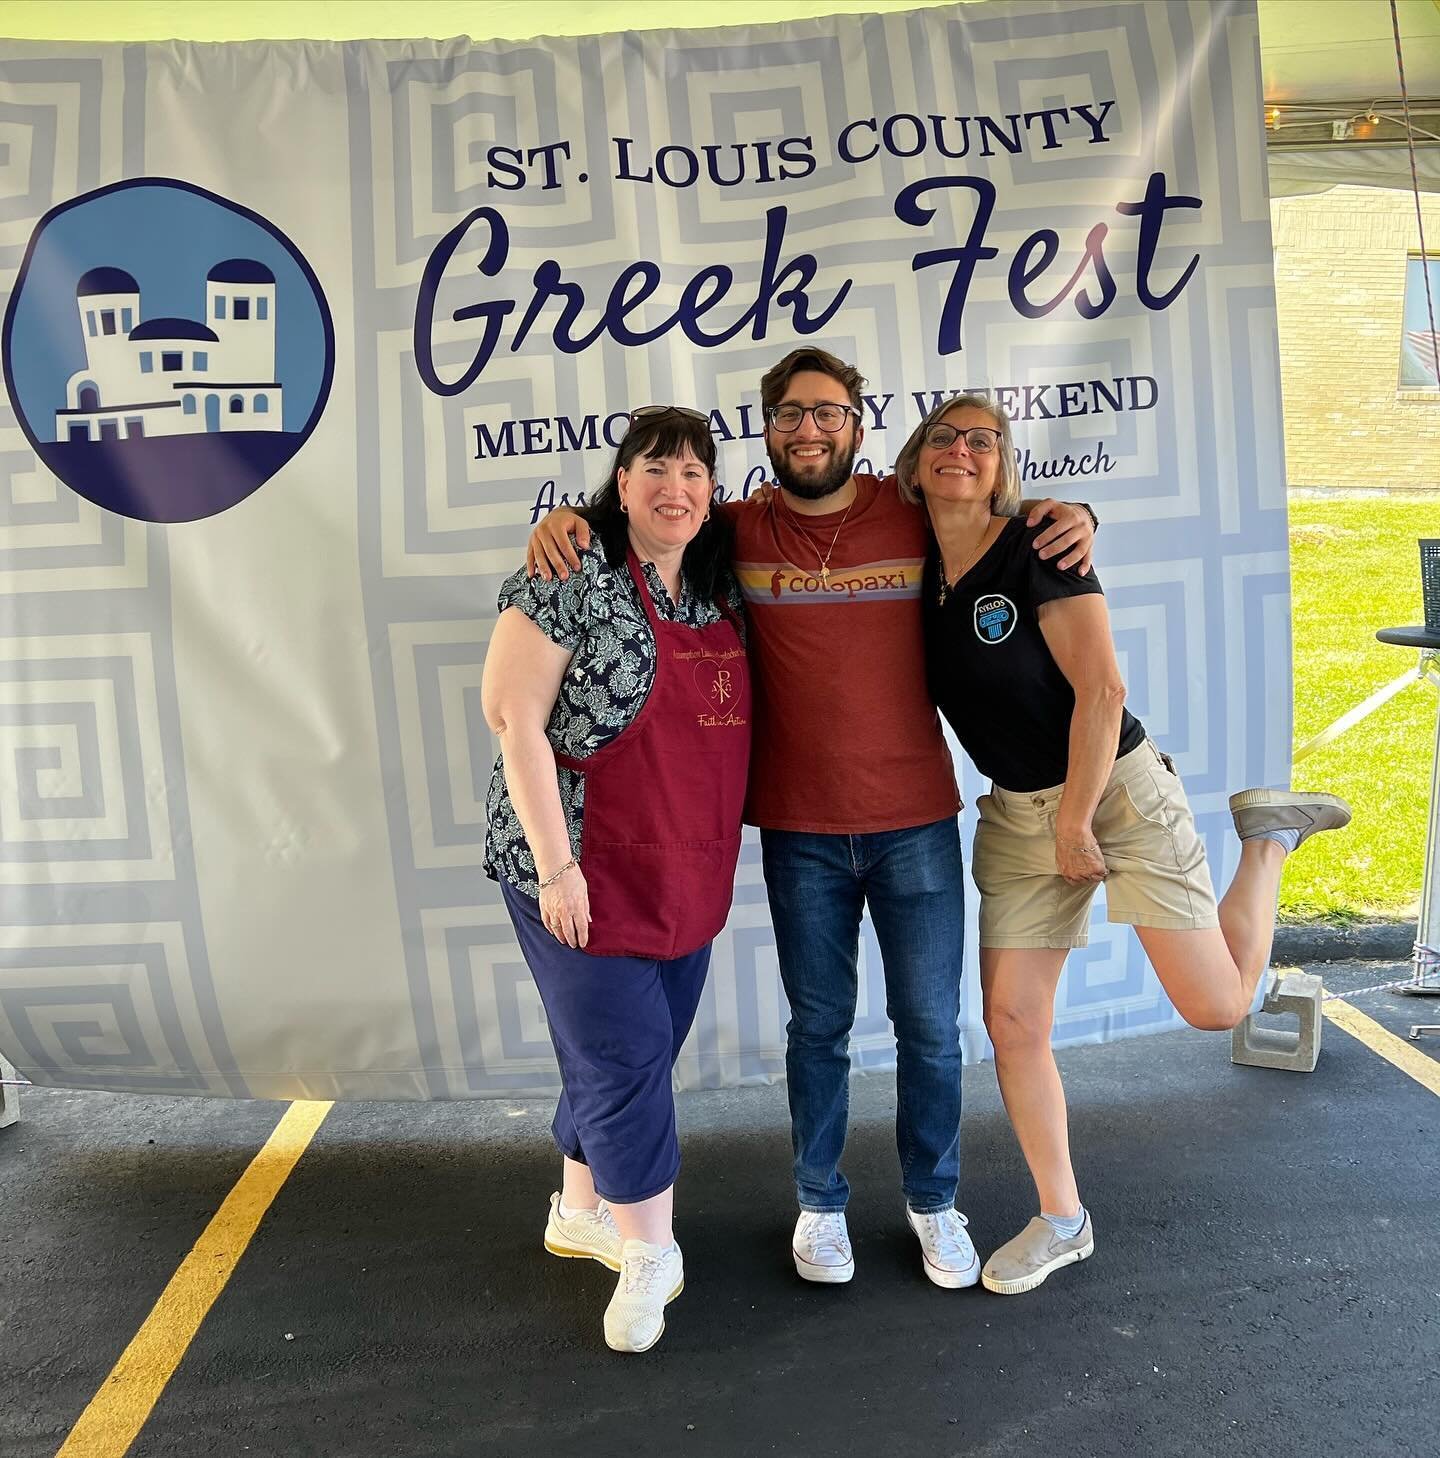 HUMANS OF THE GREEK FEST

&ldquo;Every year, I eagerly await the St. Louis County Greek Festival&mdash;not for the delicious souvlaki or ice cold Mythos, but for the chance to witness my friends miraculously remember they&rsquo;re Greek for a weekend